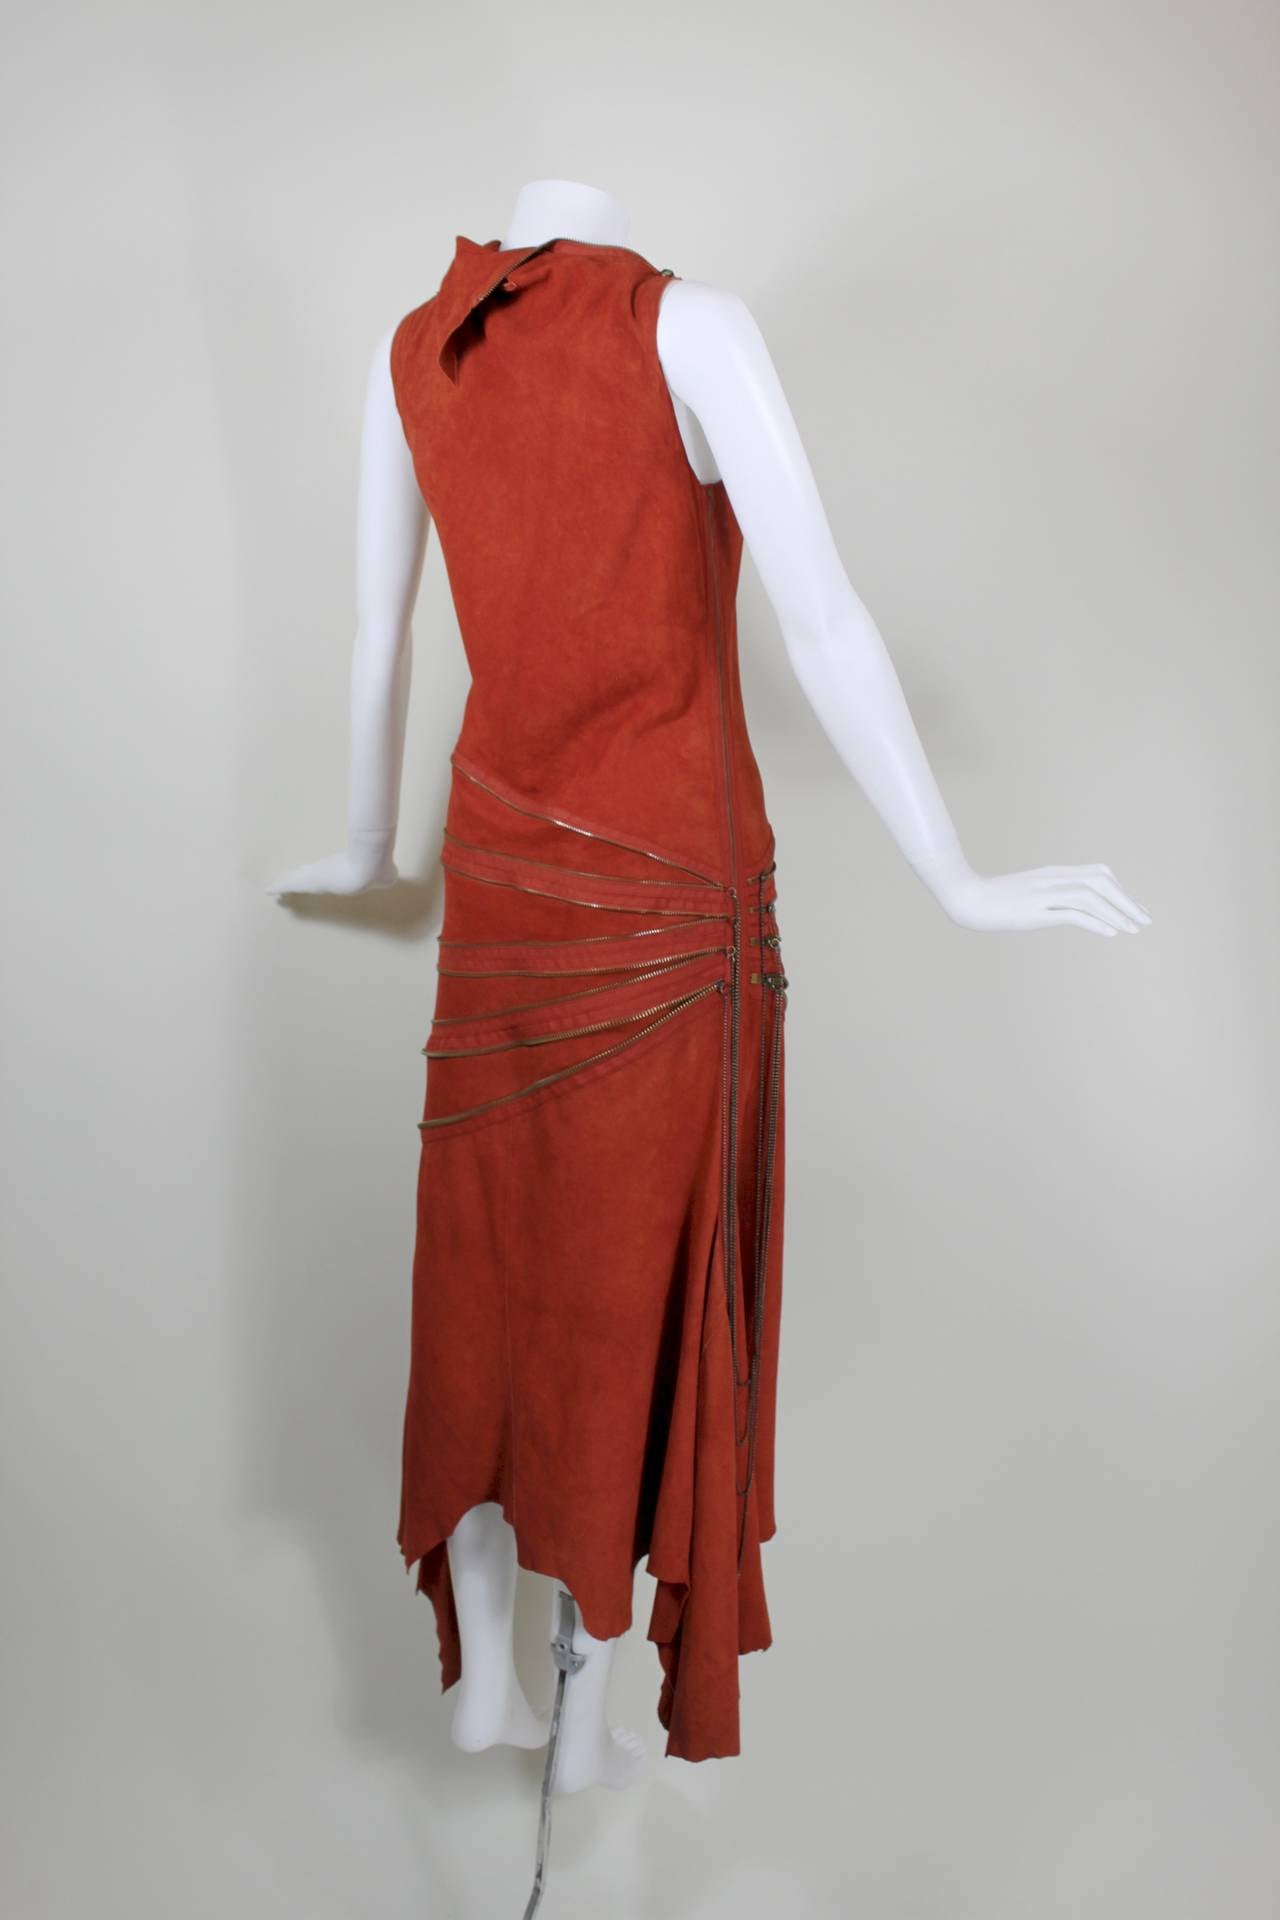 A luxe burnt rust suede dress from Jean Paul Gaultier, featuring four rows of fully functioning zippers to adjust the asymmetrical silhouette. A jagged hem adds movement in the skirt.

Meausrements--
Bust: up to 36 inches
Waist: up to 30